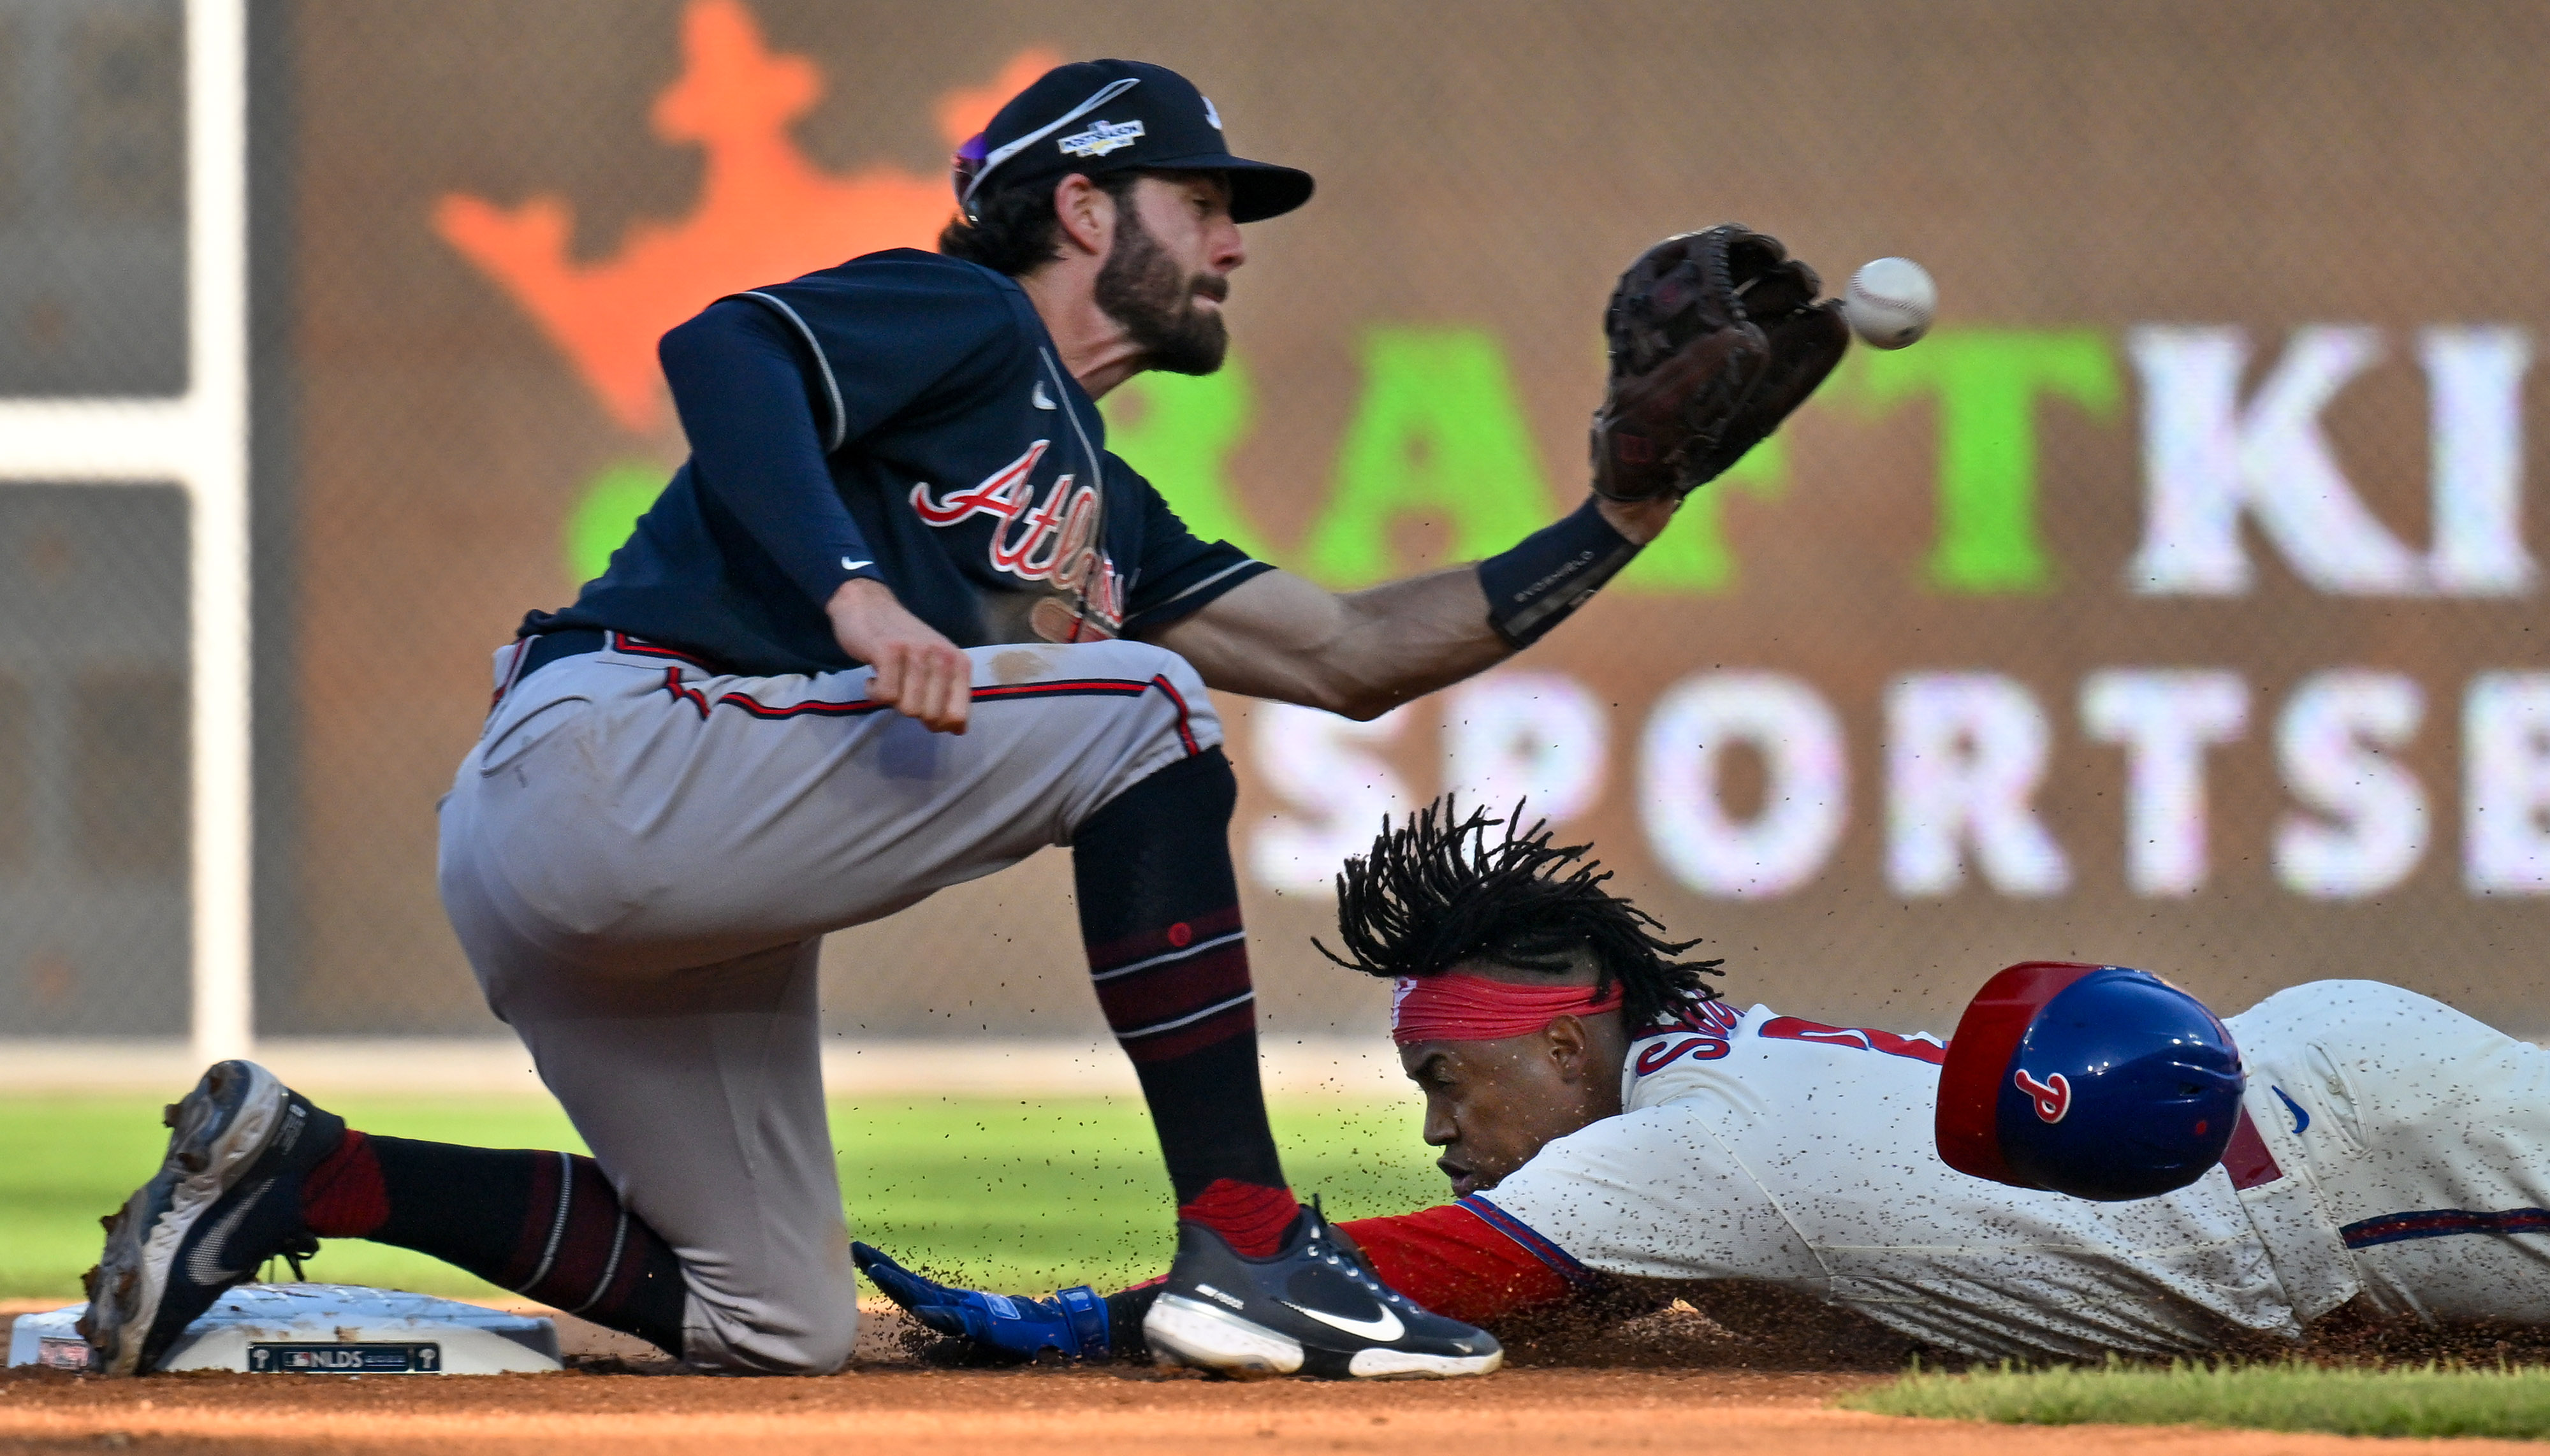 Dansby Swanson has chance to become hometown hero